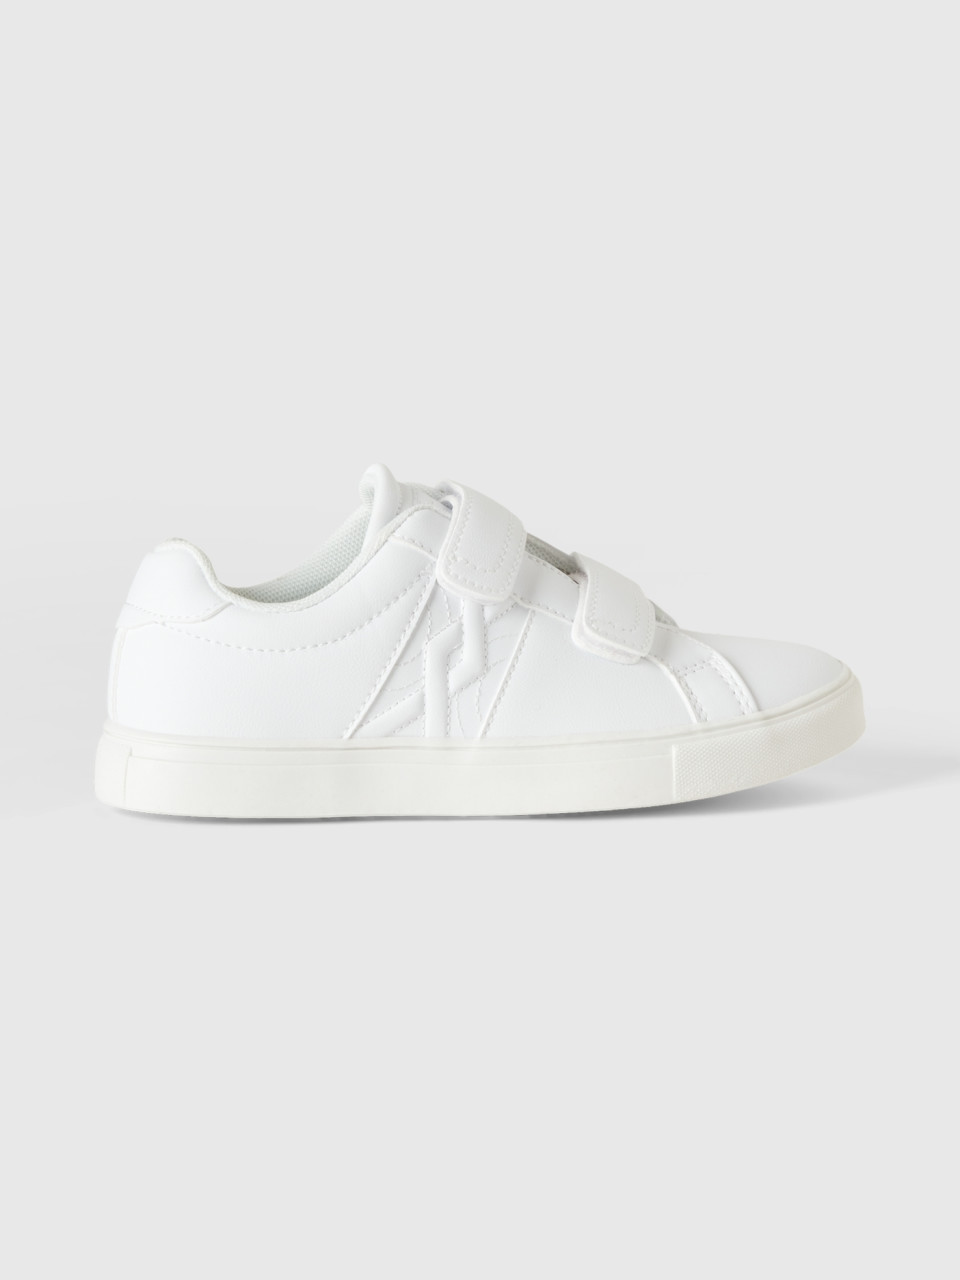 Benetton, Low-top Sneakers With Logo,5Y, White